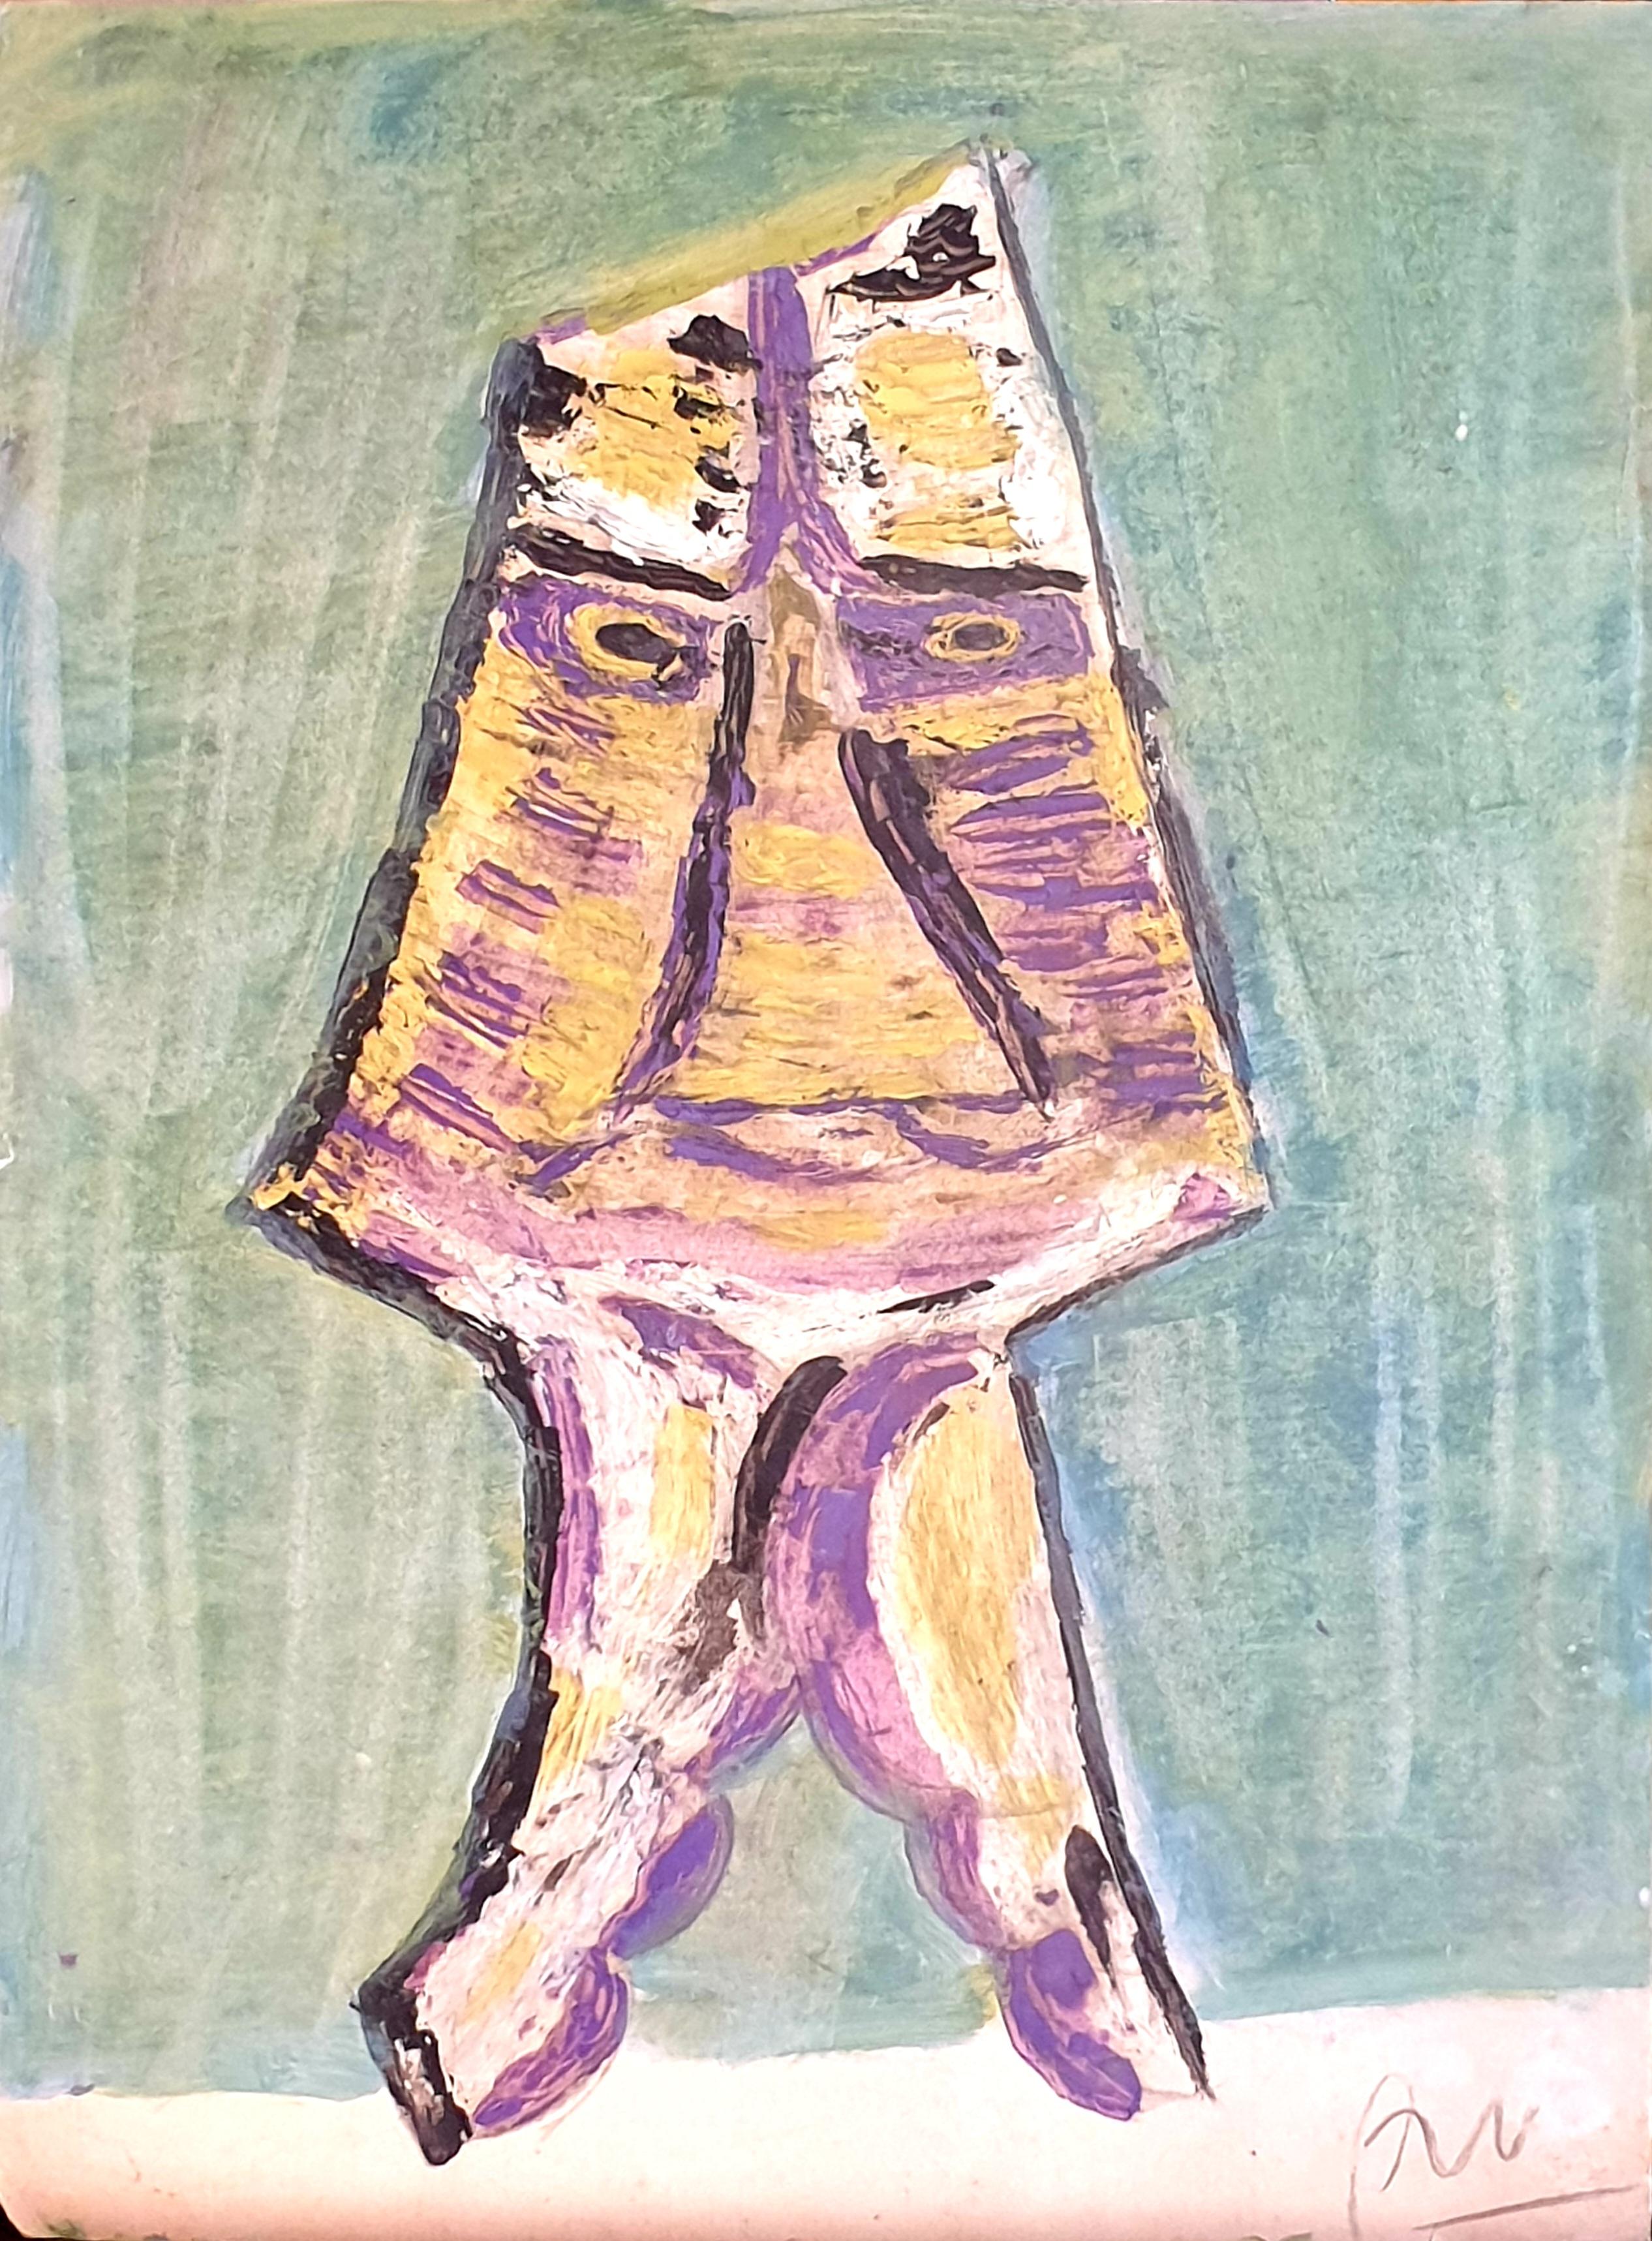 Abstract Expressionist CoBRA Style Fantastical Figure. Acrylic on Card.